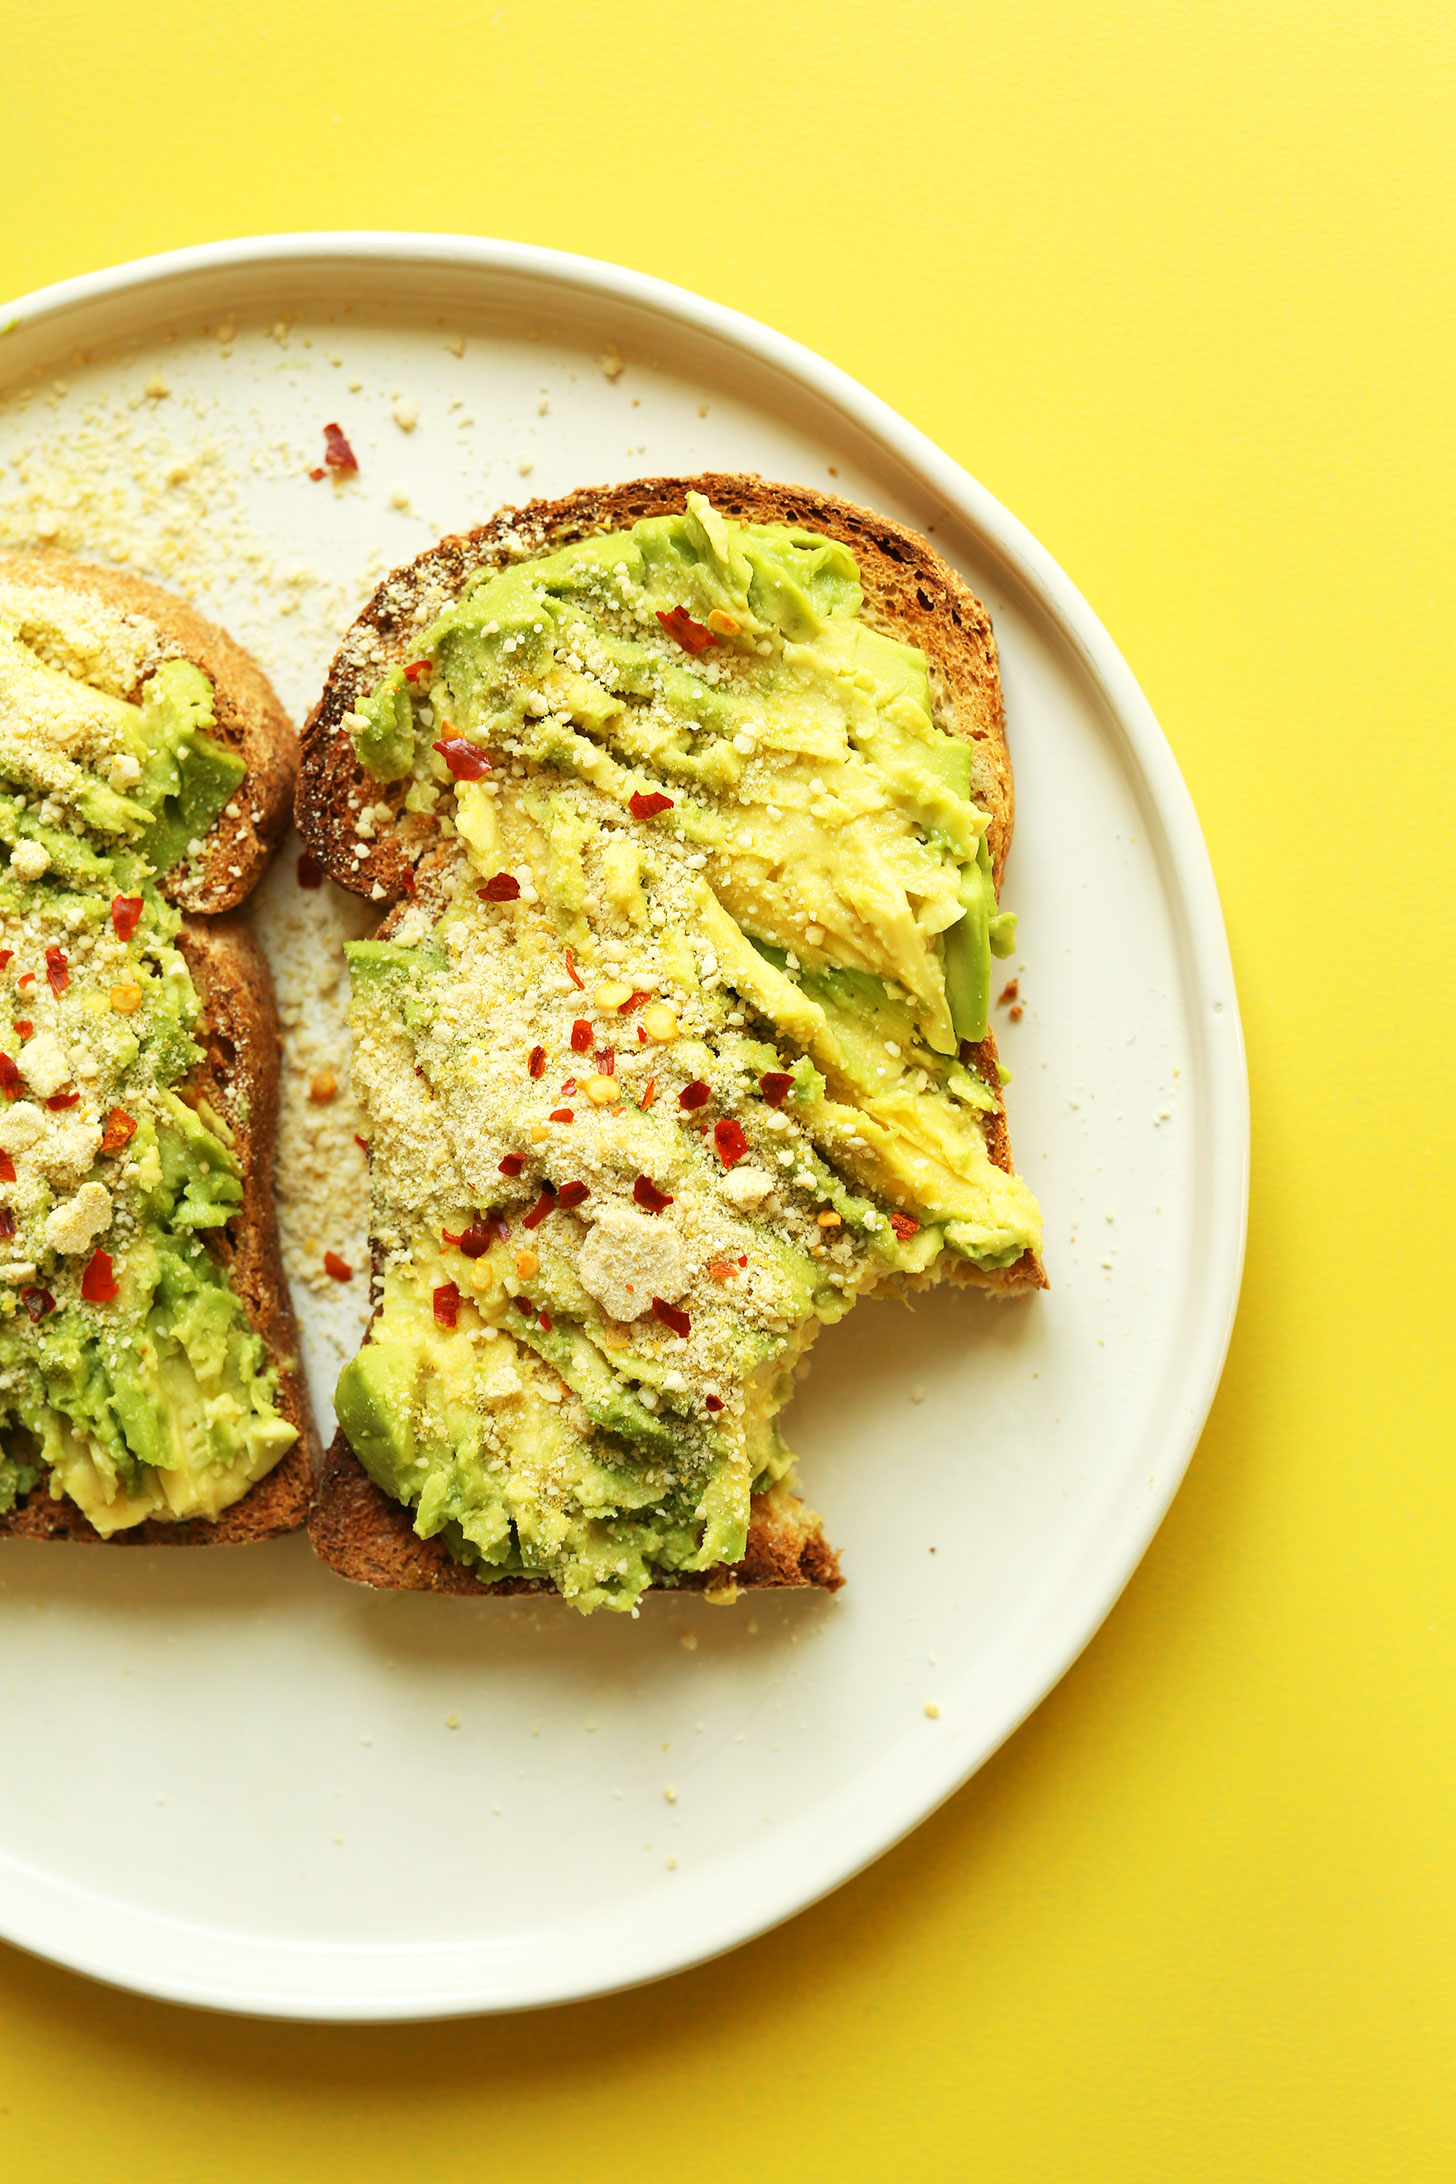 Plate of The Best Avocado Toast recipe made with gluten-free bread